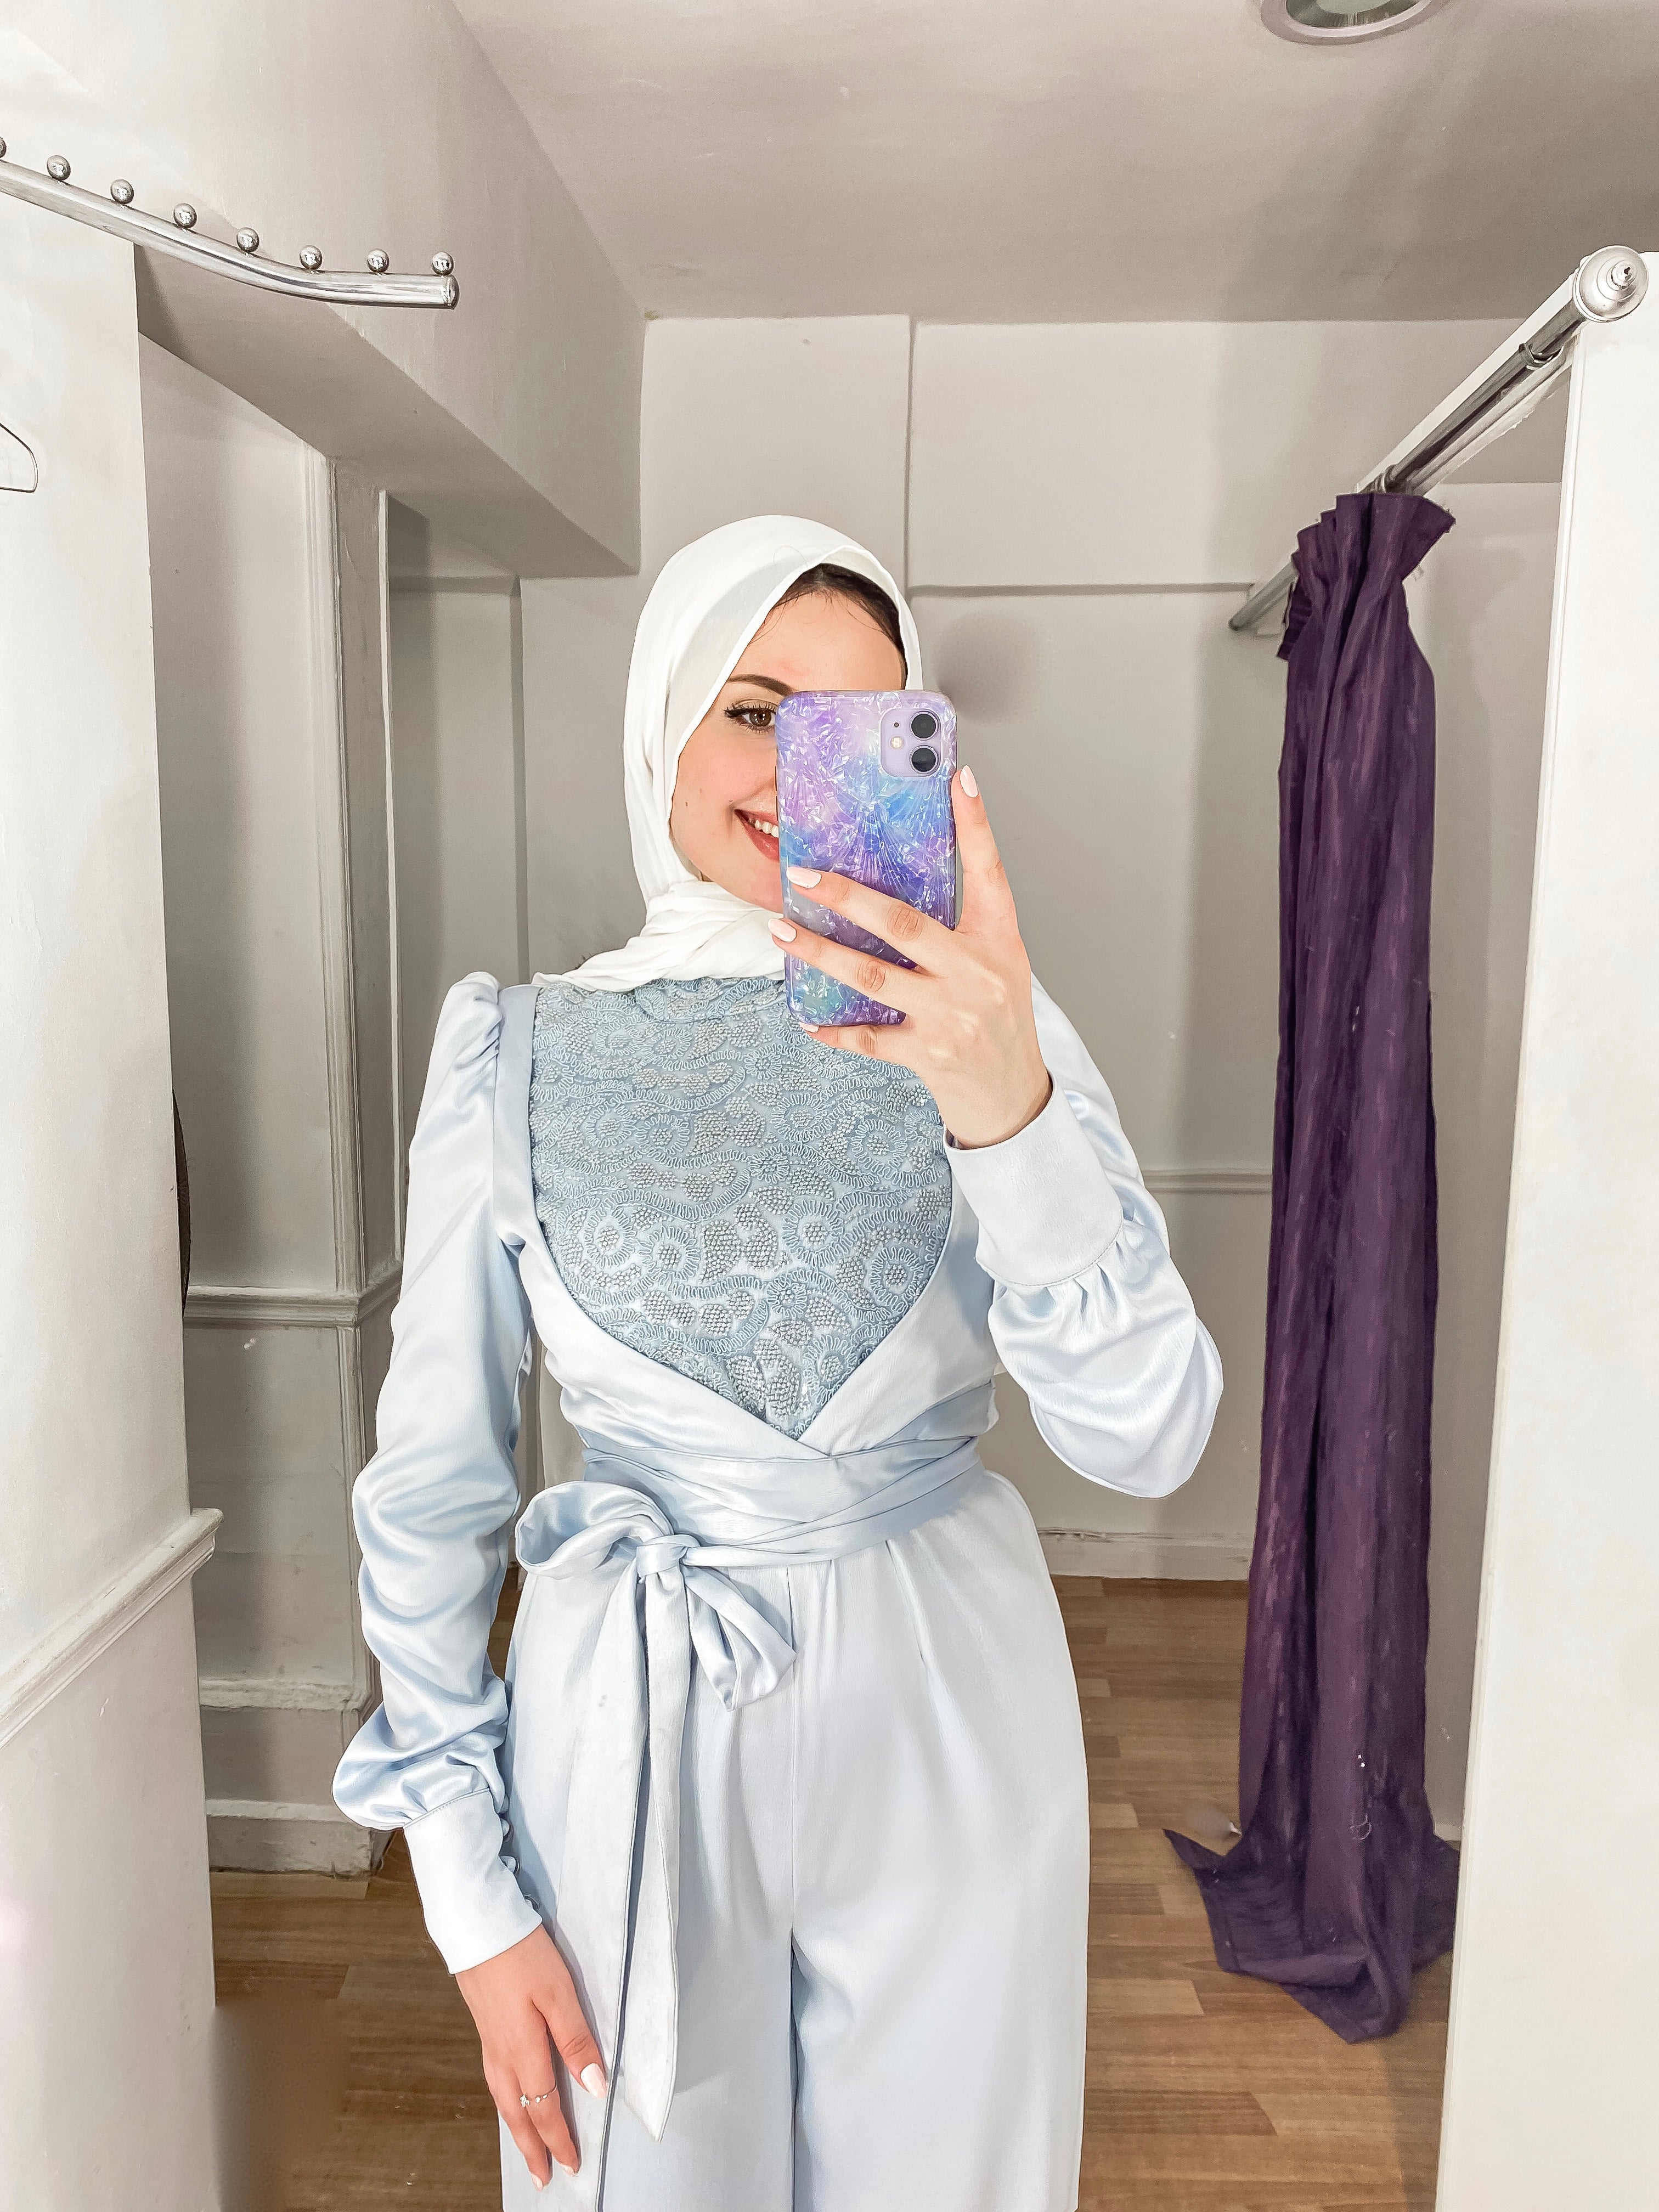 Aggregate more than 170 jumpsuit and hijab super hot